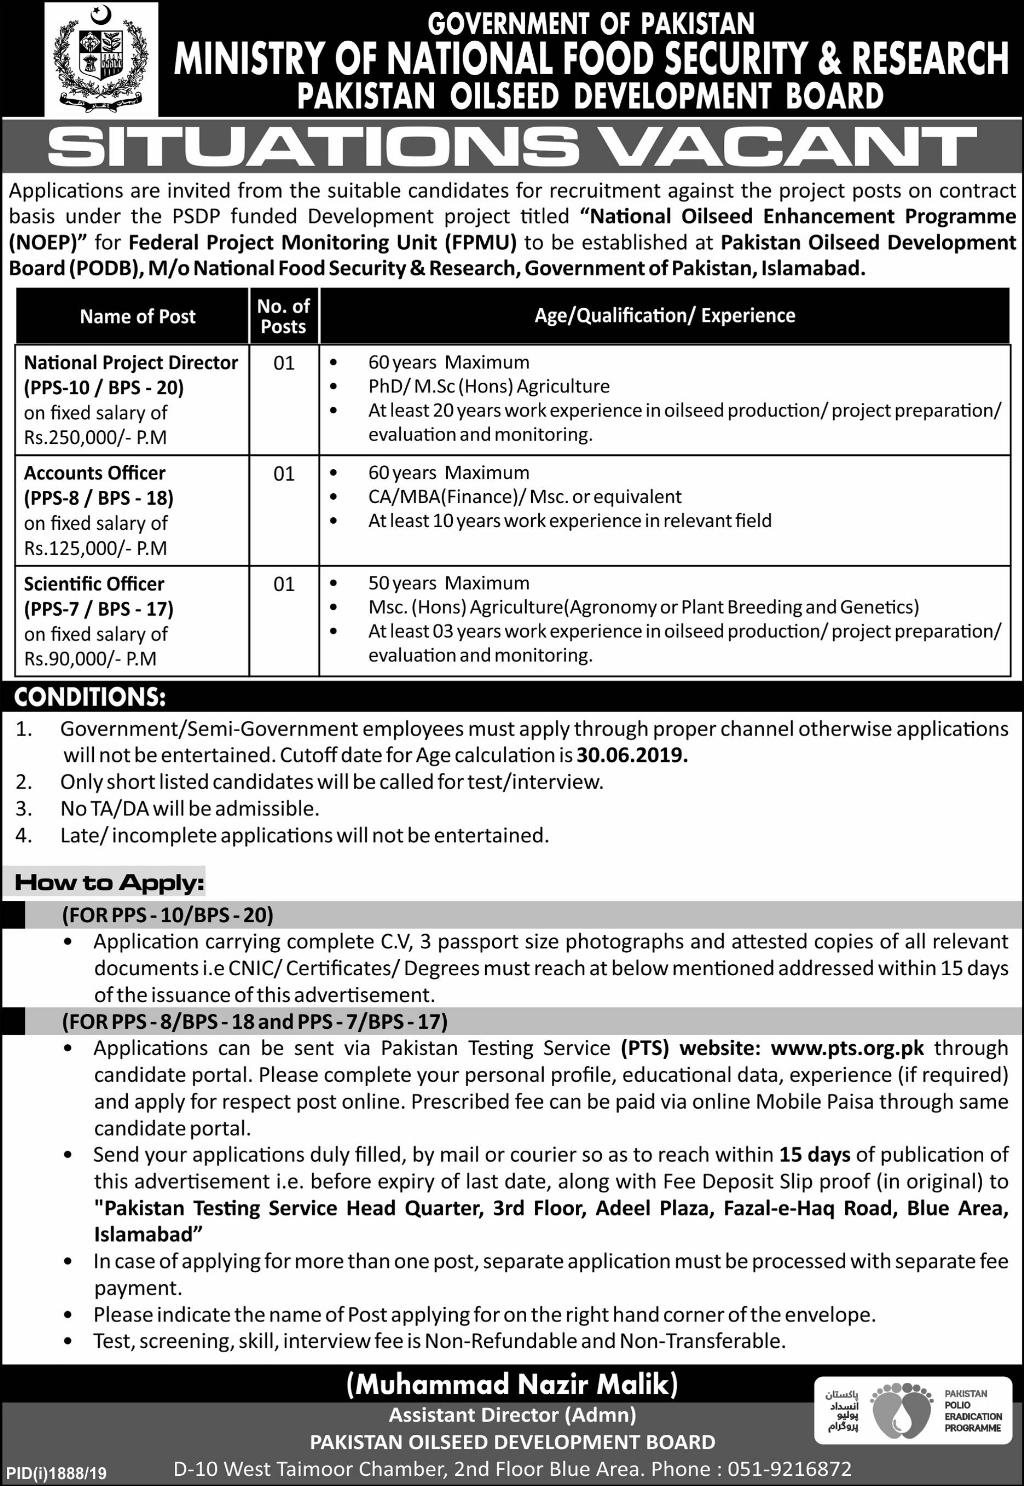 Ministry of National Food Security & Research Jobs 2019